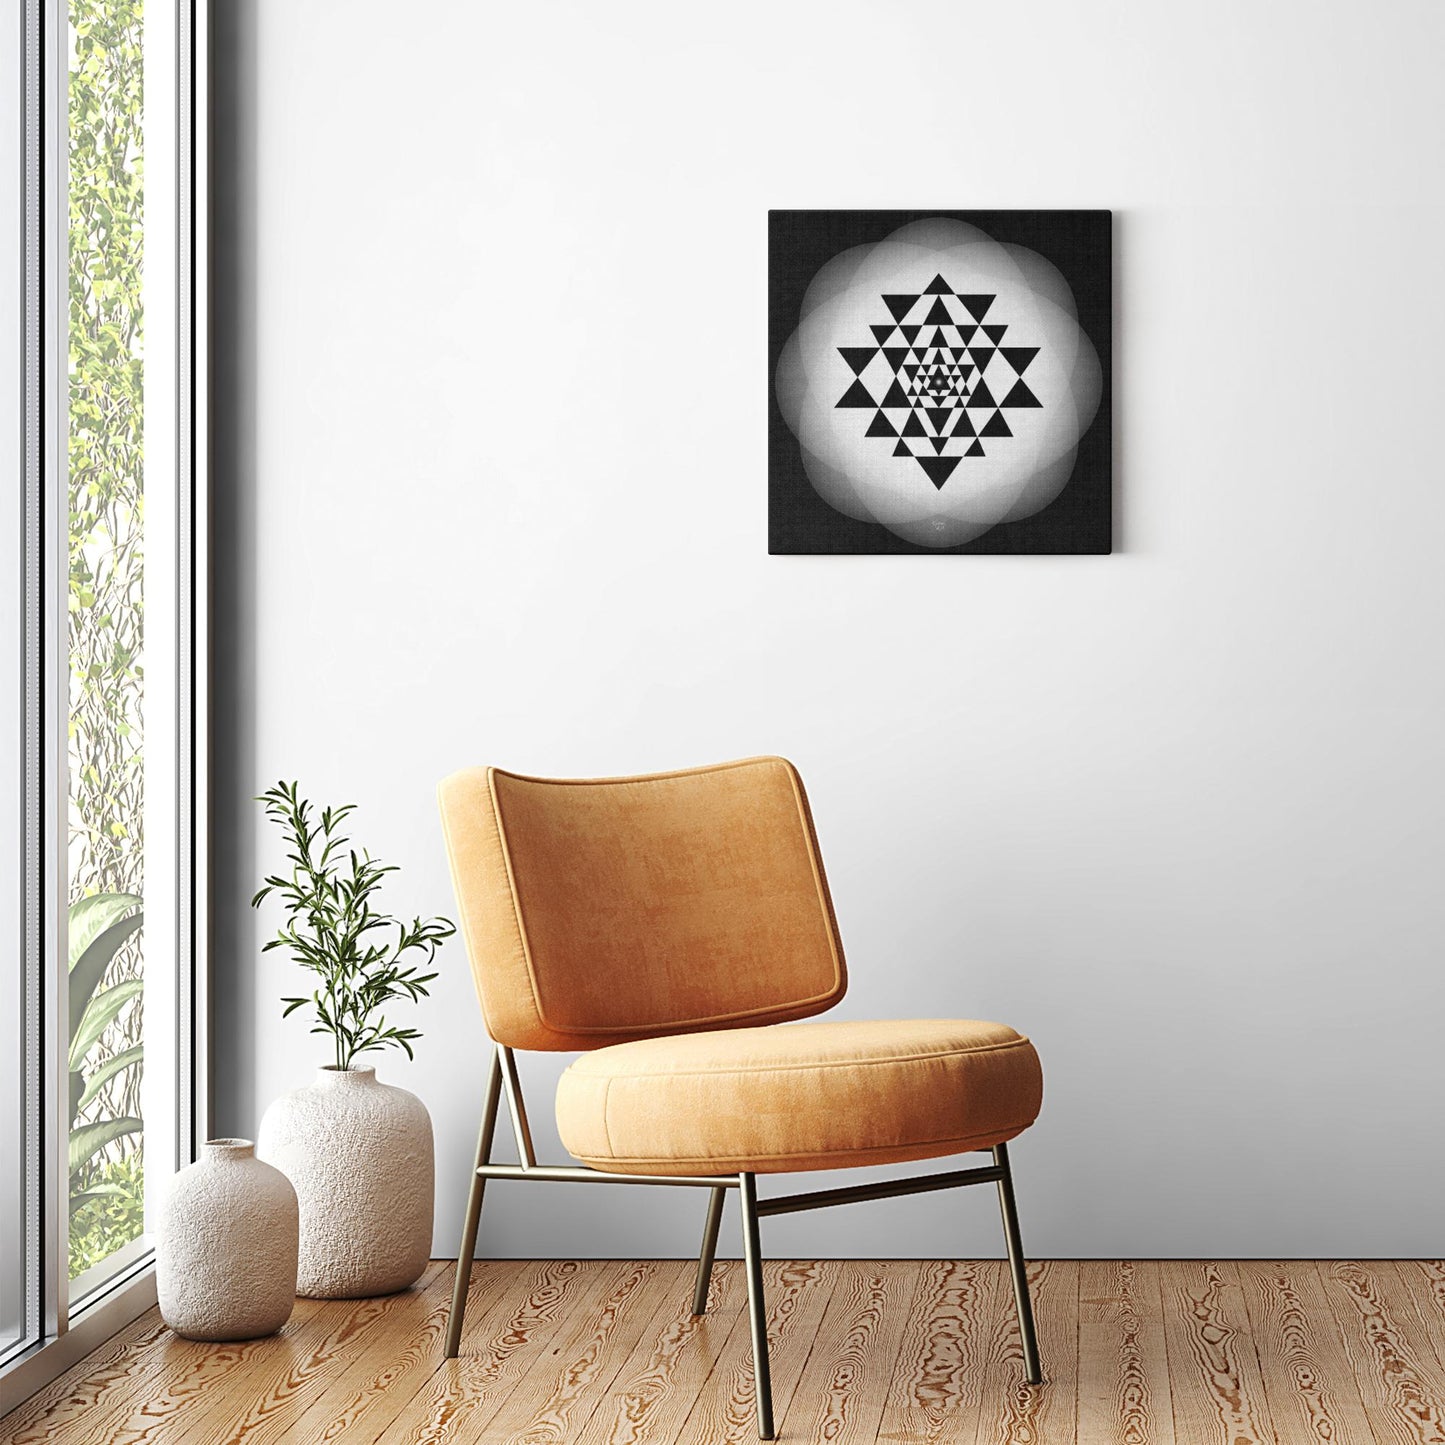 Completion In Energy Shree Yantra Canvas Art